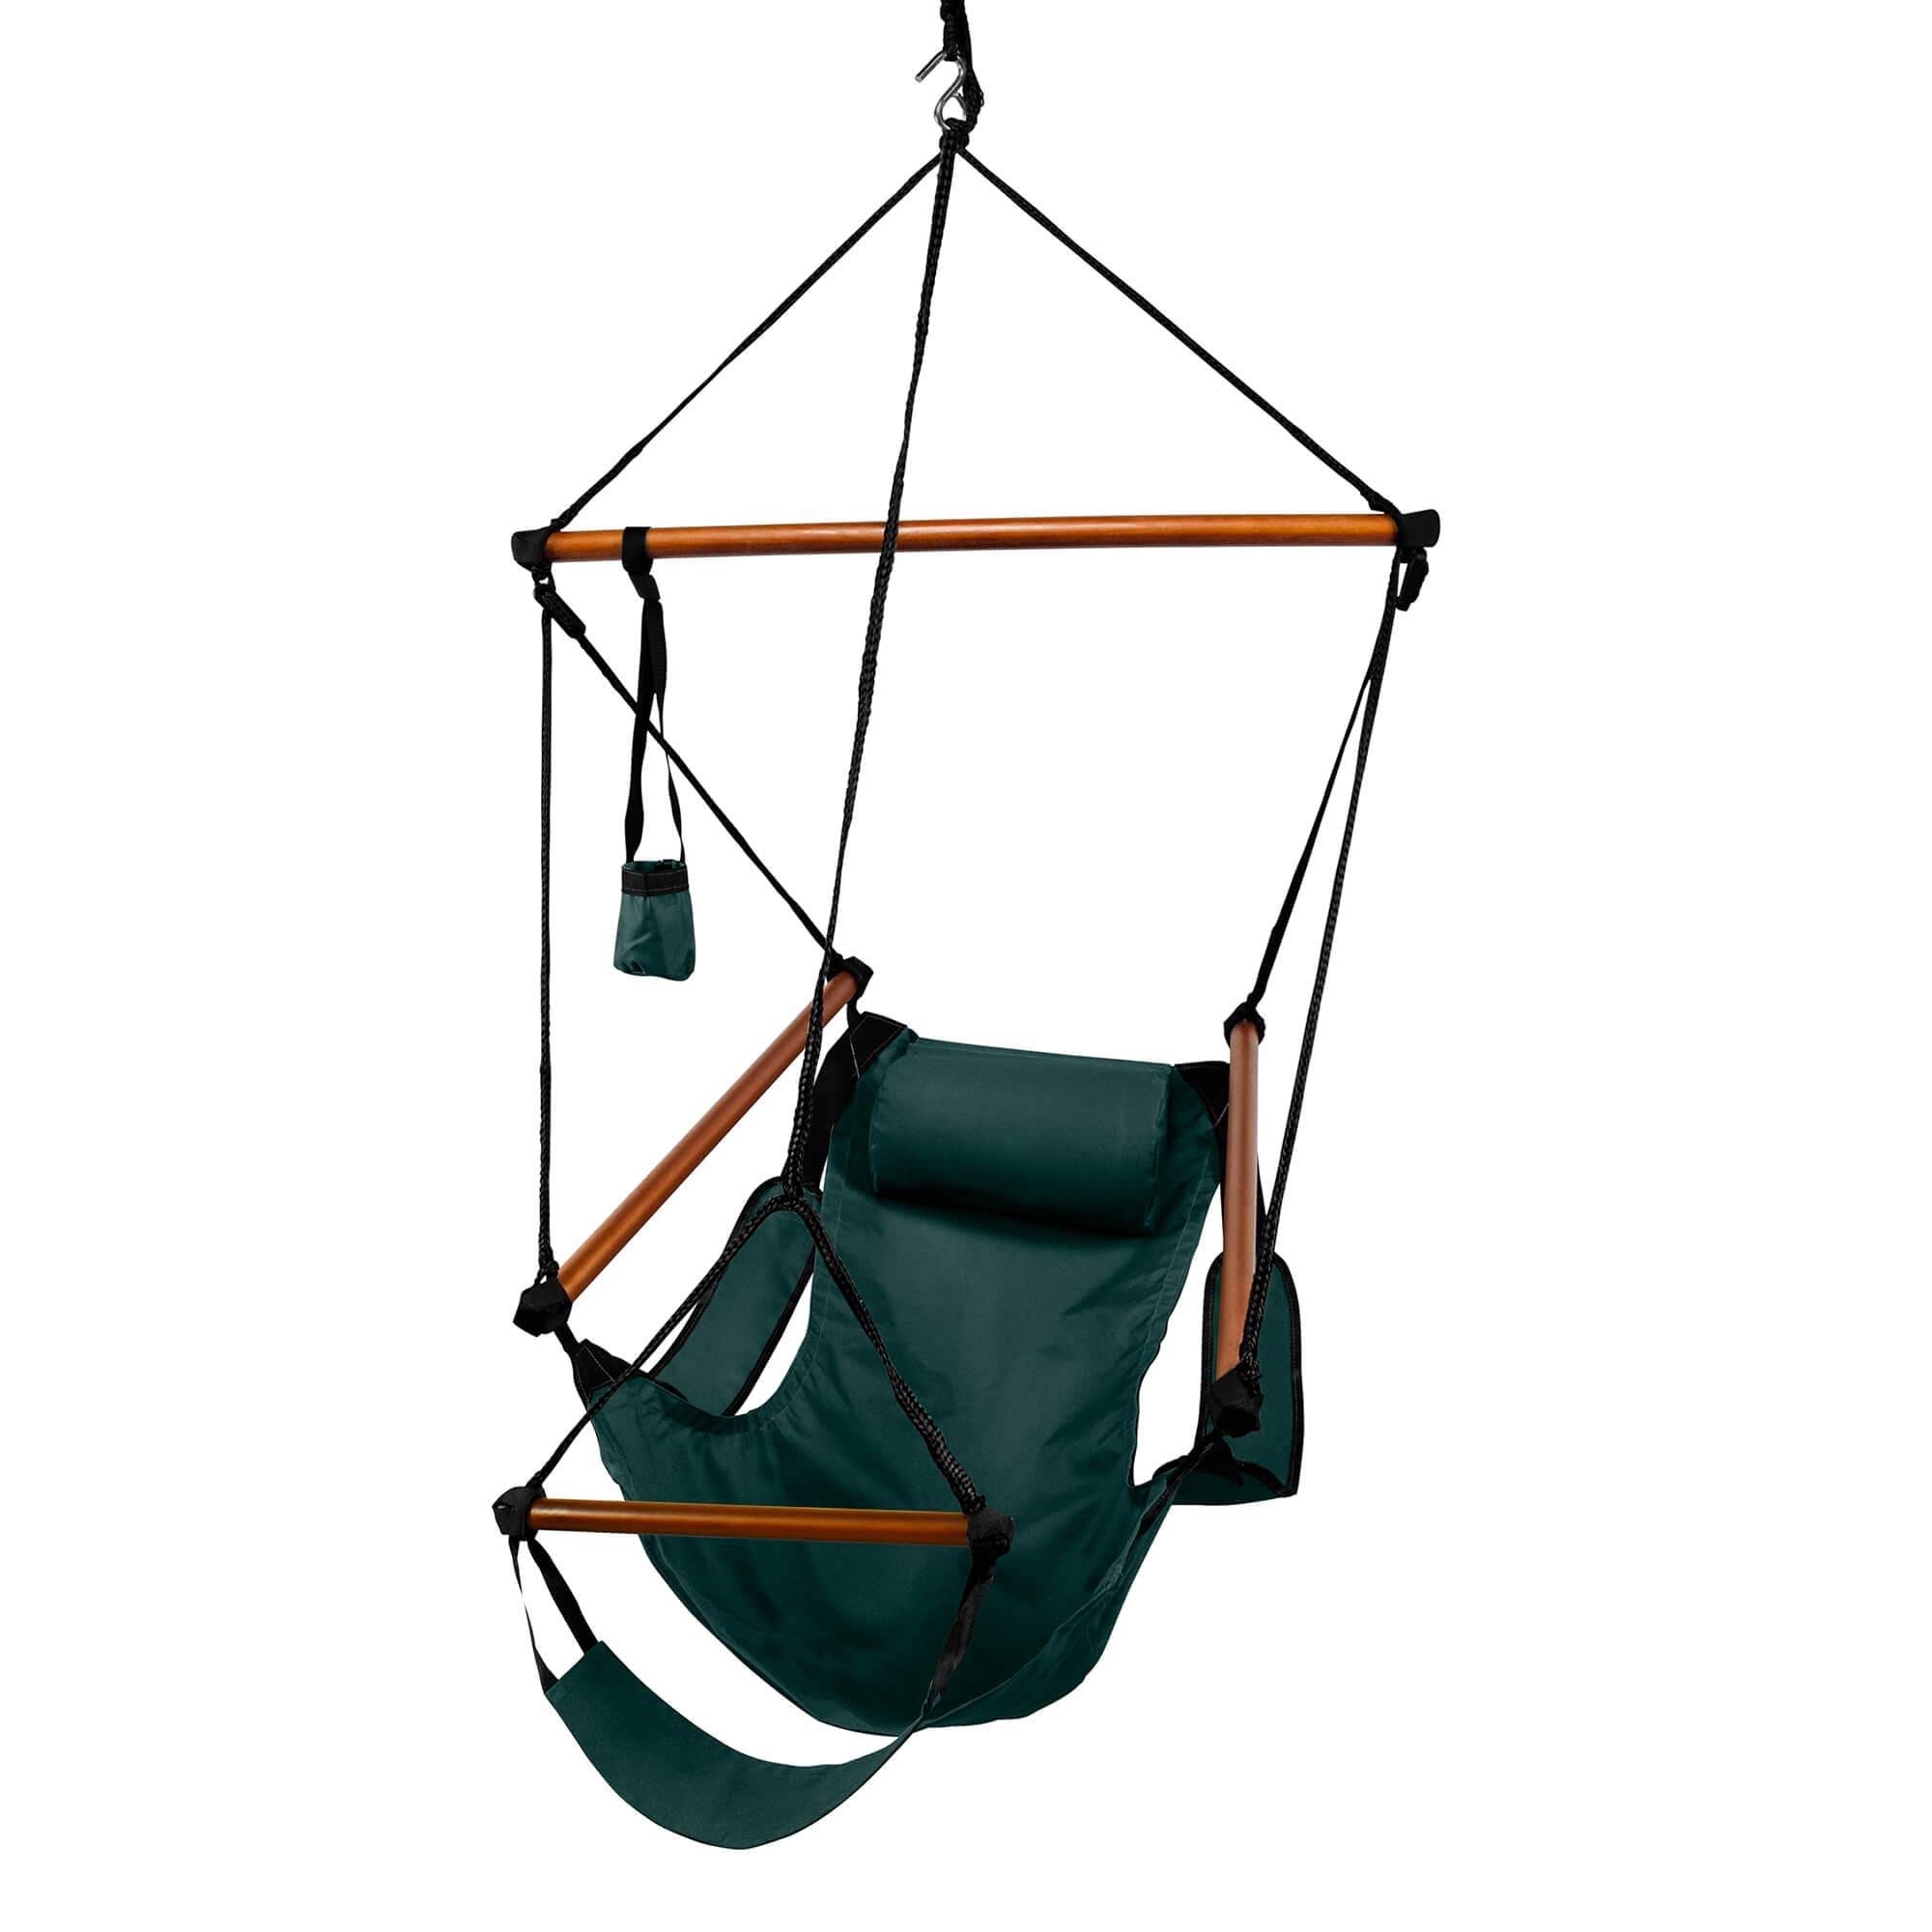 Deluxe Hanging Wood Zero-gravity Hammock Chair With Cup Holder